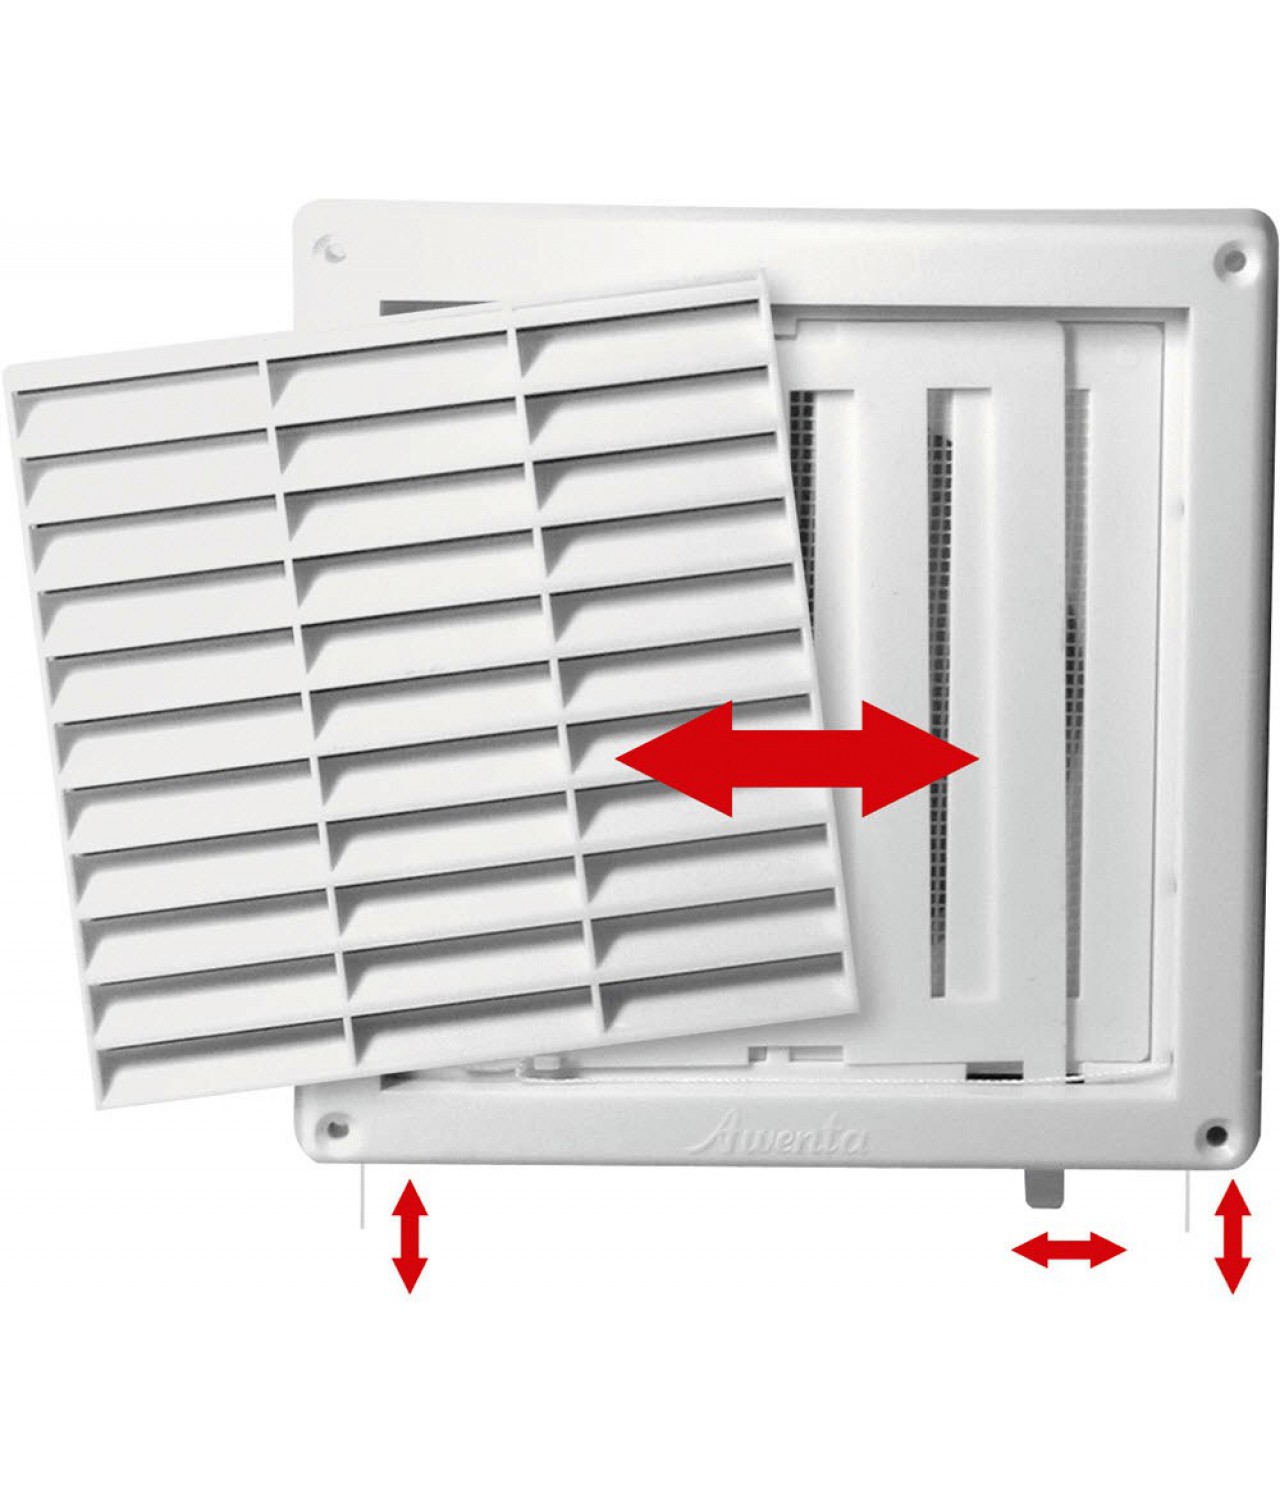 Ventilation grille with shutter GRT55, 165x165 mm, Ø100 mm - Wall vent covers